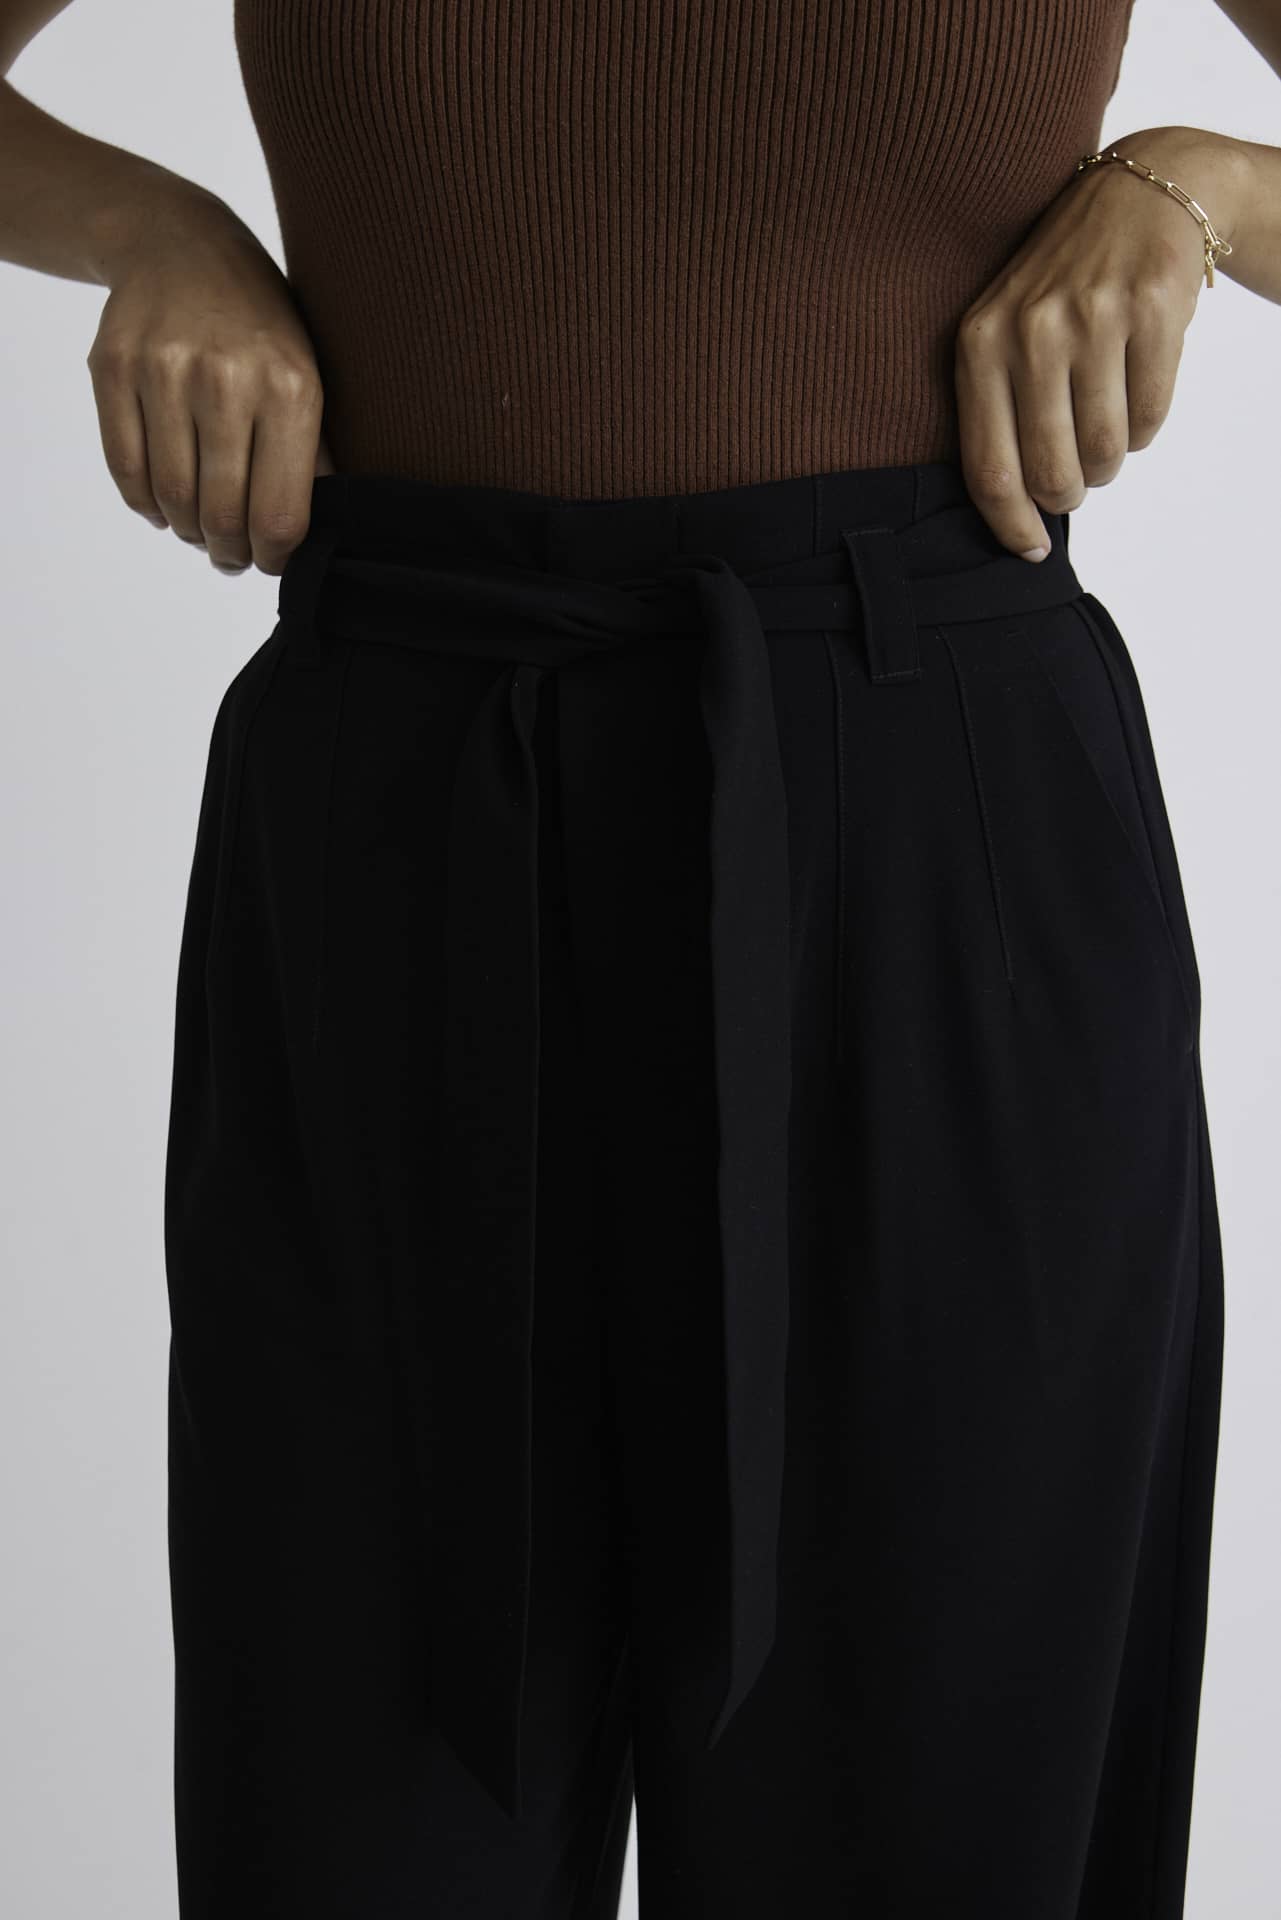 Stories Be Told Sydney Crepe Tie Belt Pant - Black  The Stories Be Told Sydney Pant is available in classic black. It features a paper bag waist, a belt to tie, pockets and is a wide leg style This pant is a fantastic wardrobe staple to take you from one season to the next.  Team back with your favourite tops or knits and layer with jackets or coats in the cooler months. 